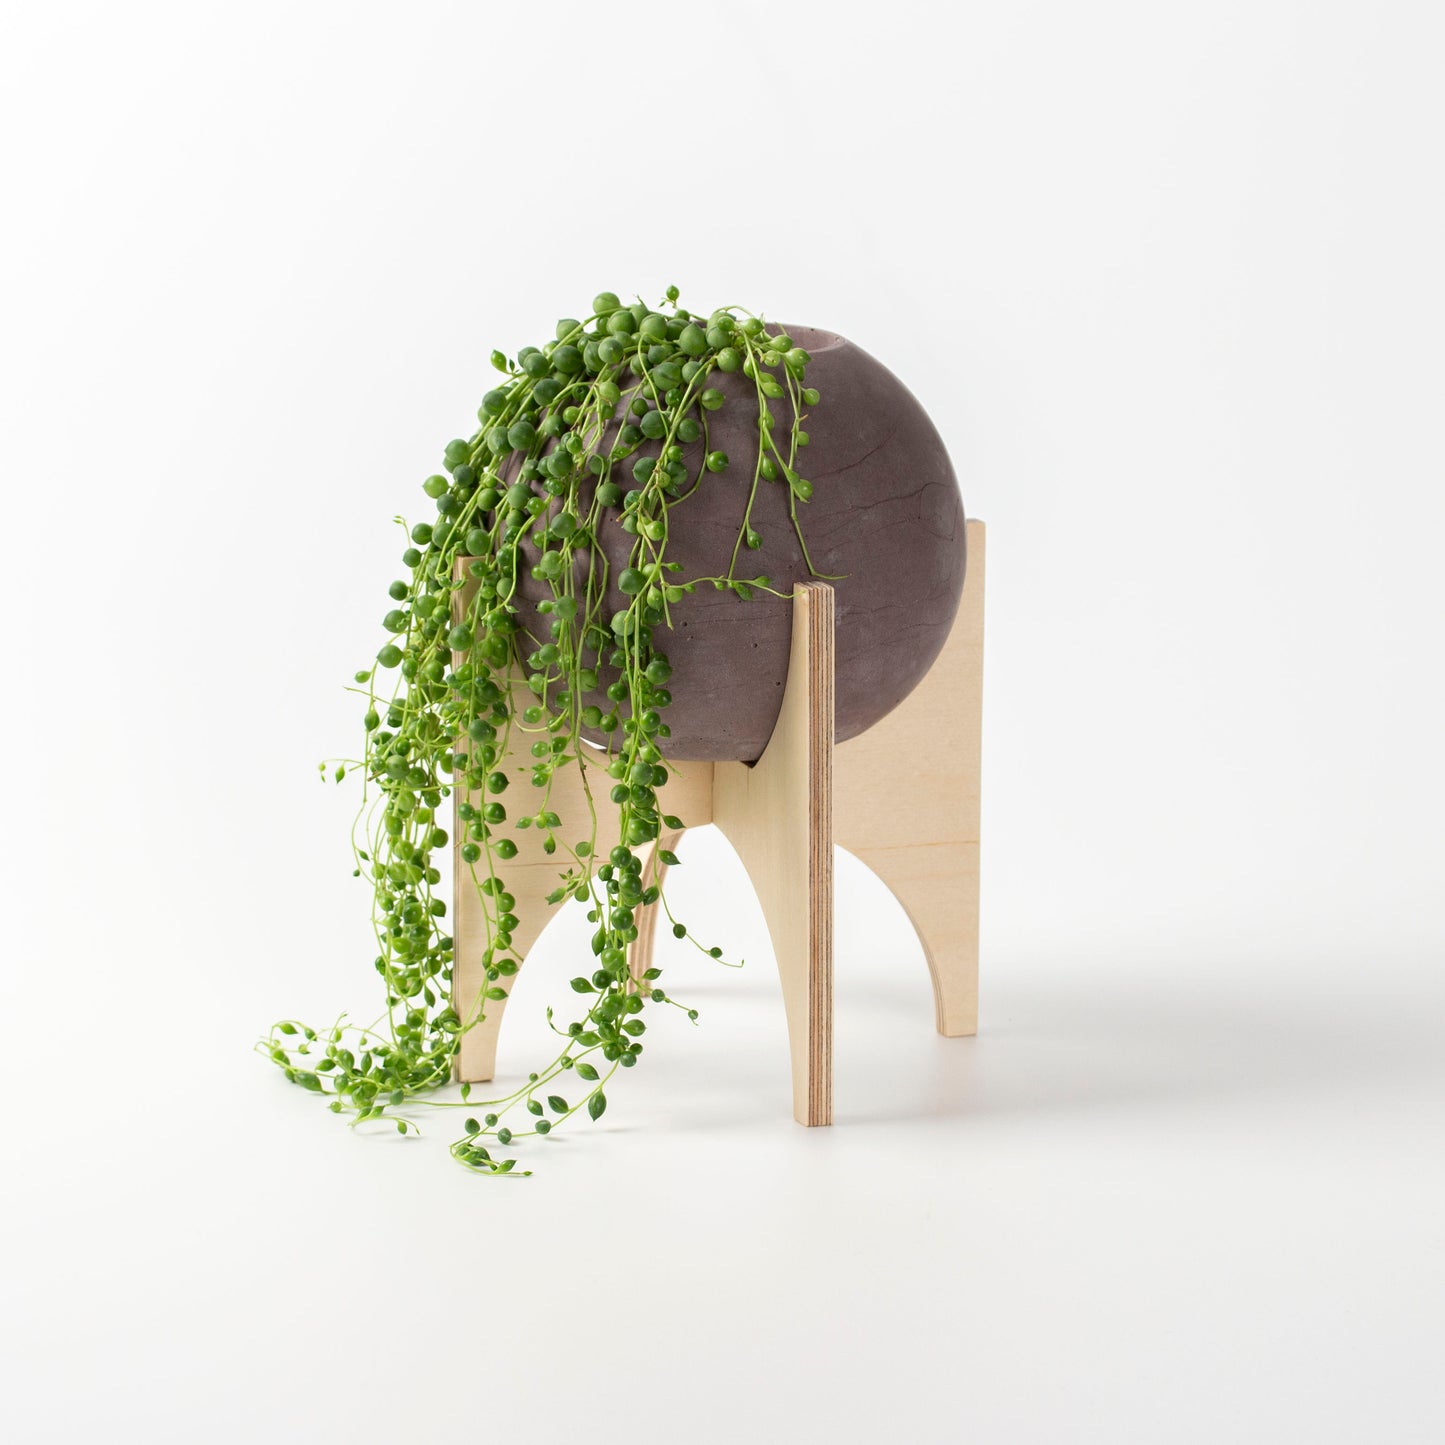 Round Concrete Planter with Wooden Stand, Modern Plant Pot